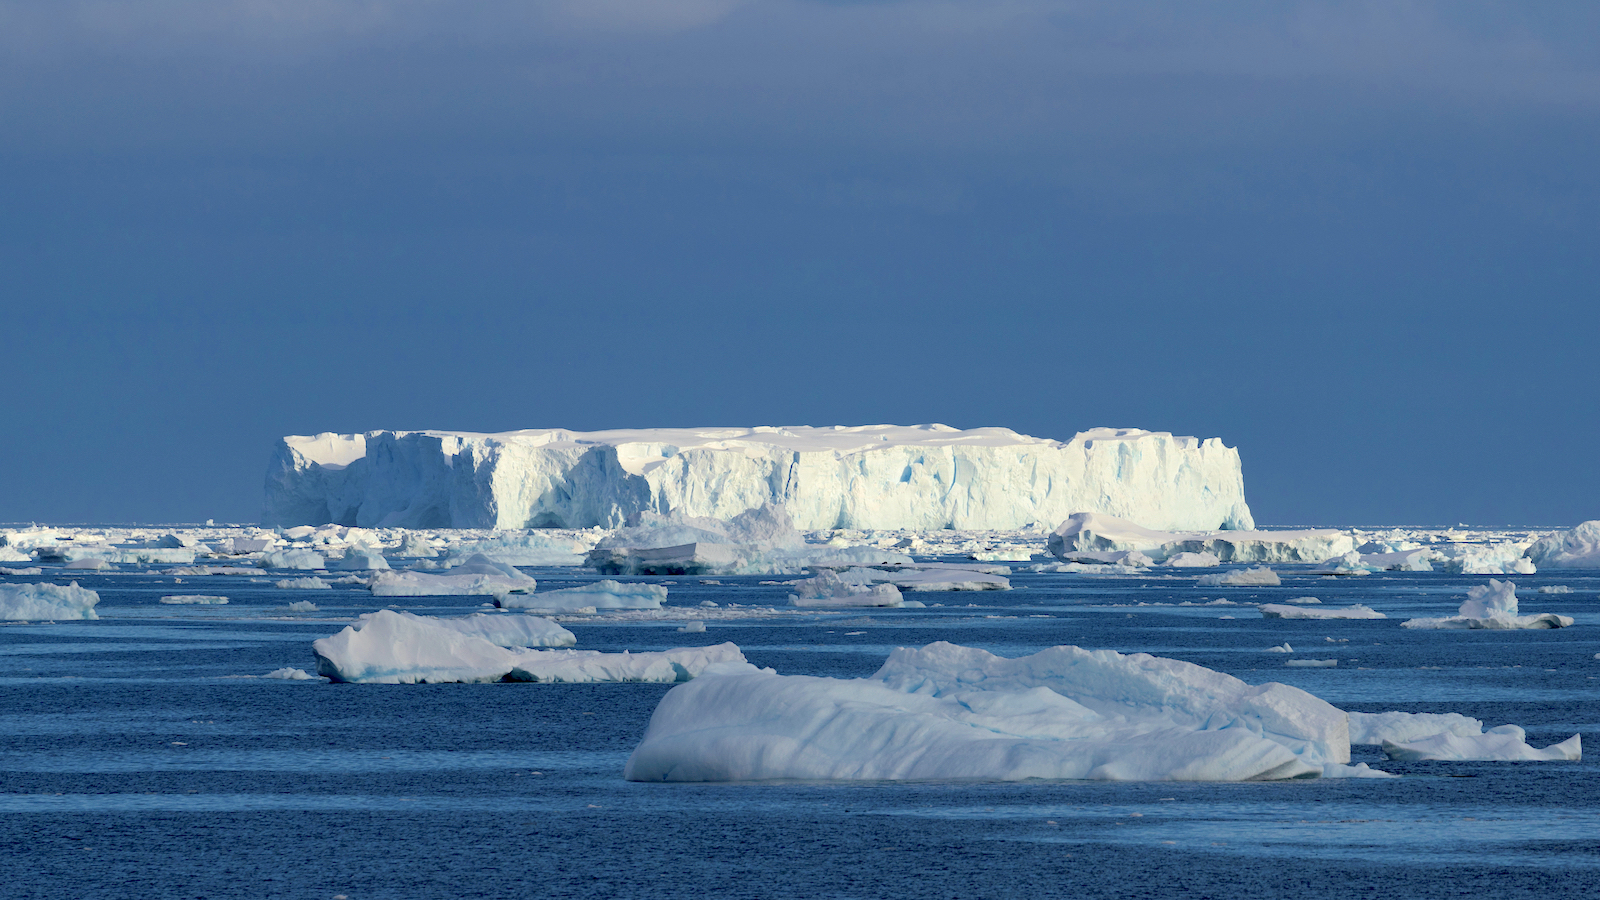 Study: Arctic Ocean started warming much earlier than previously